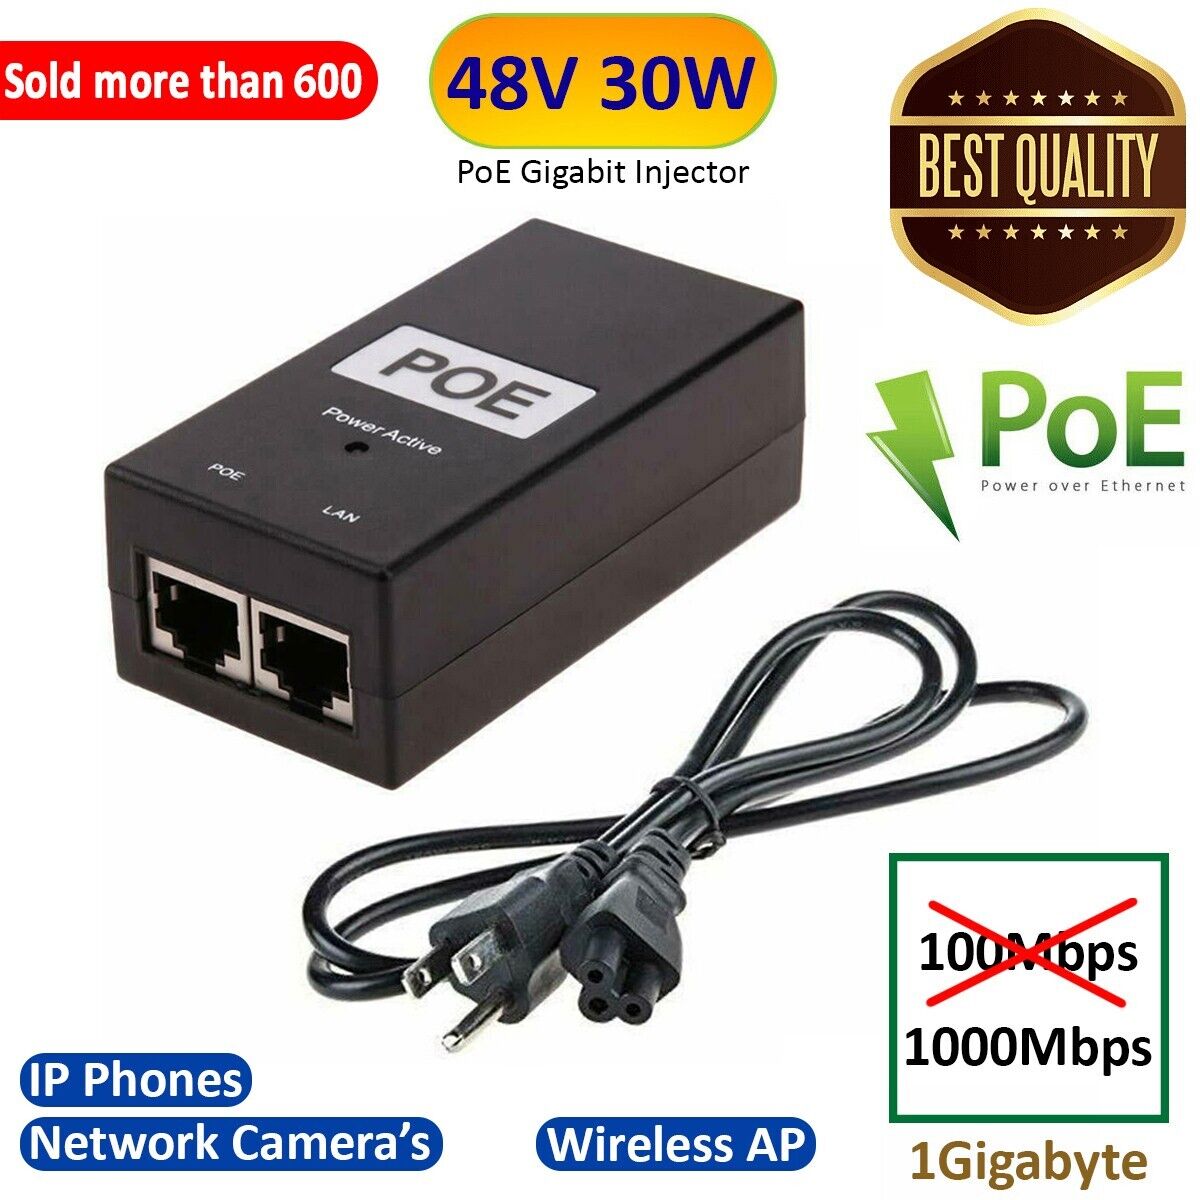 POE Injector 48V 30W PowerOver Ethernet Adapter For IP Phone Camera IEEE 802.3af